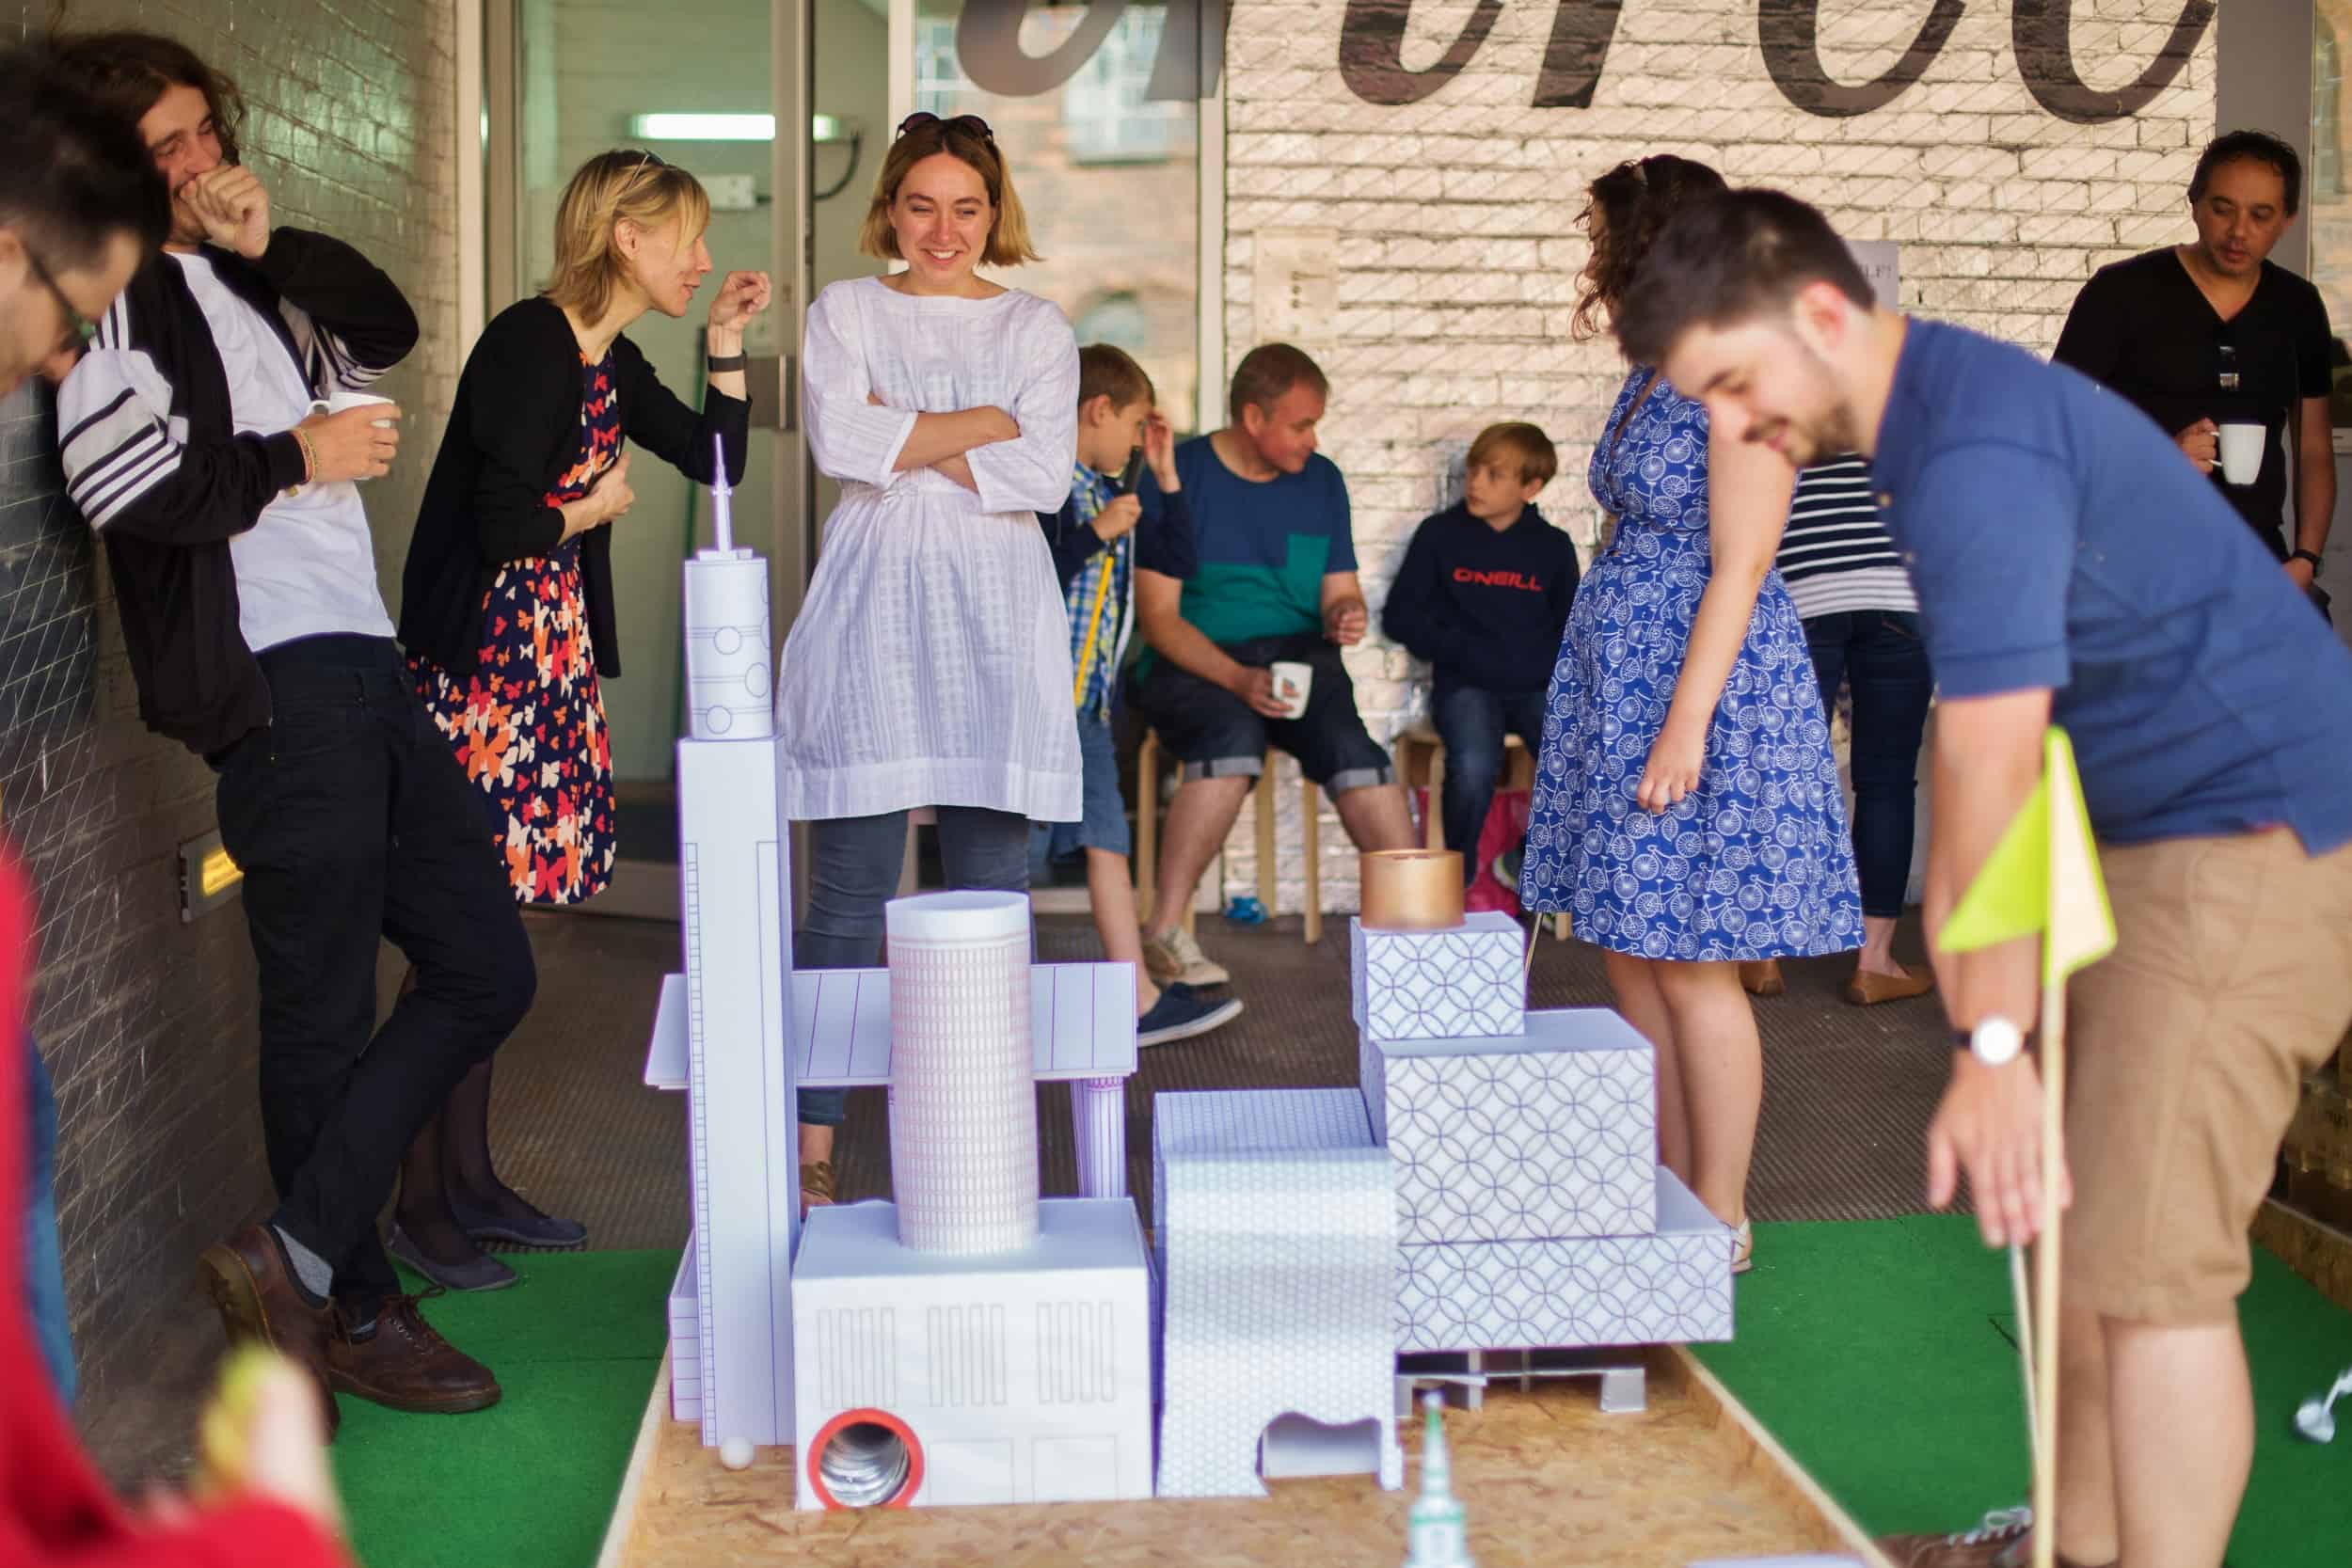 This year's Open Studios will feature a giant skittles game, demonstrations and activities.